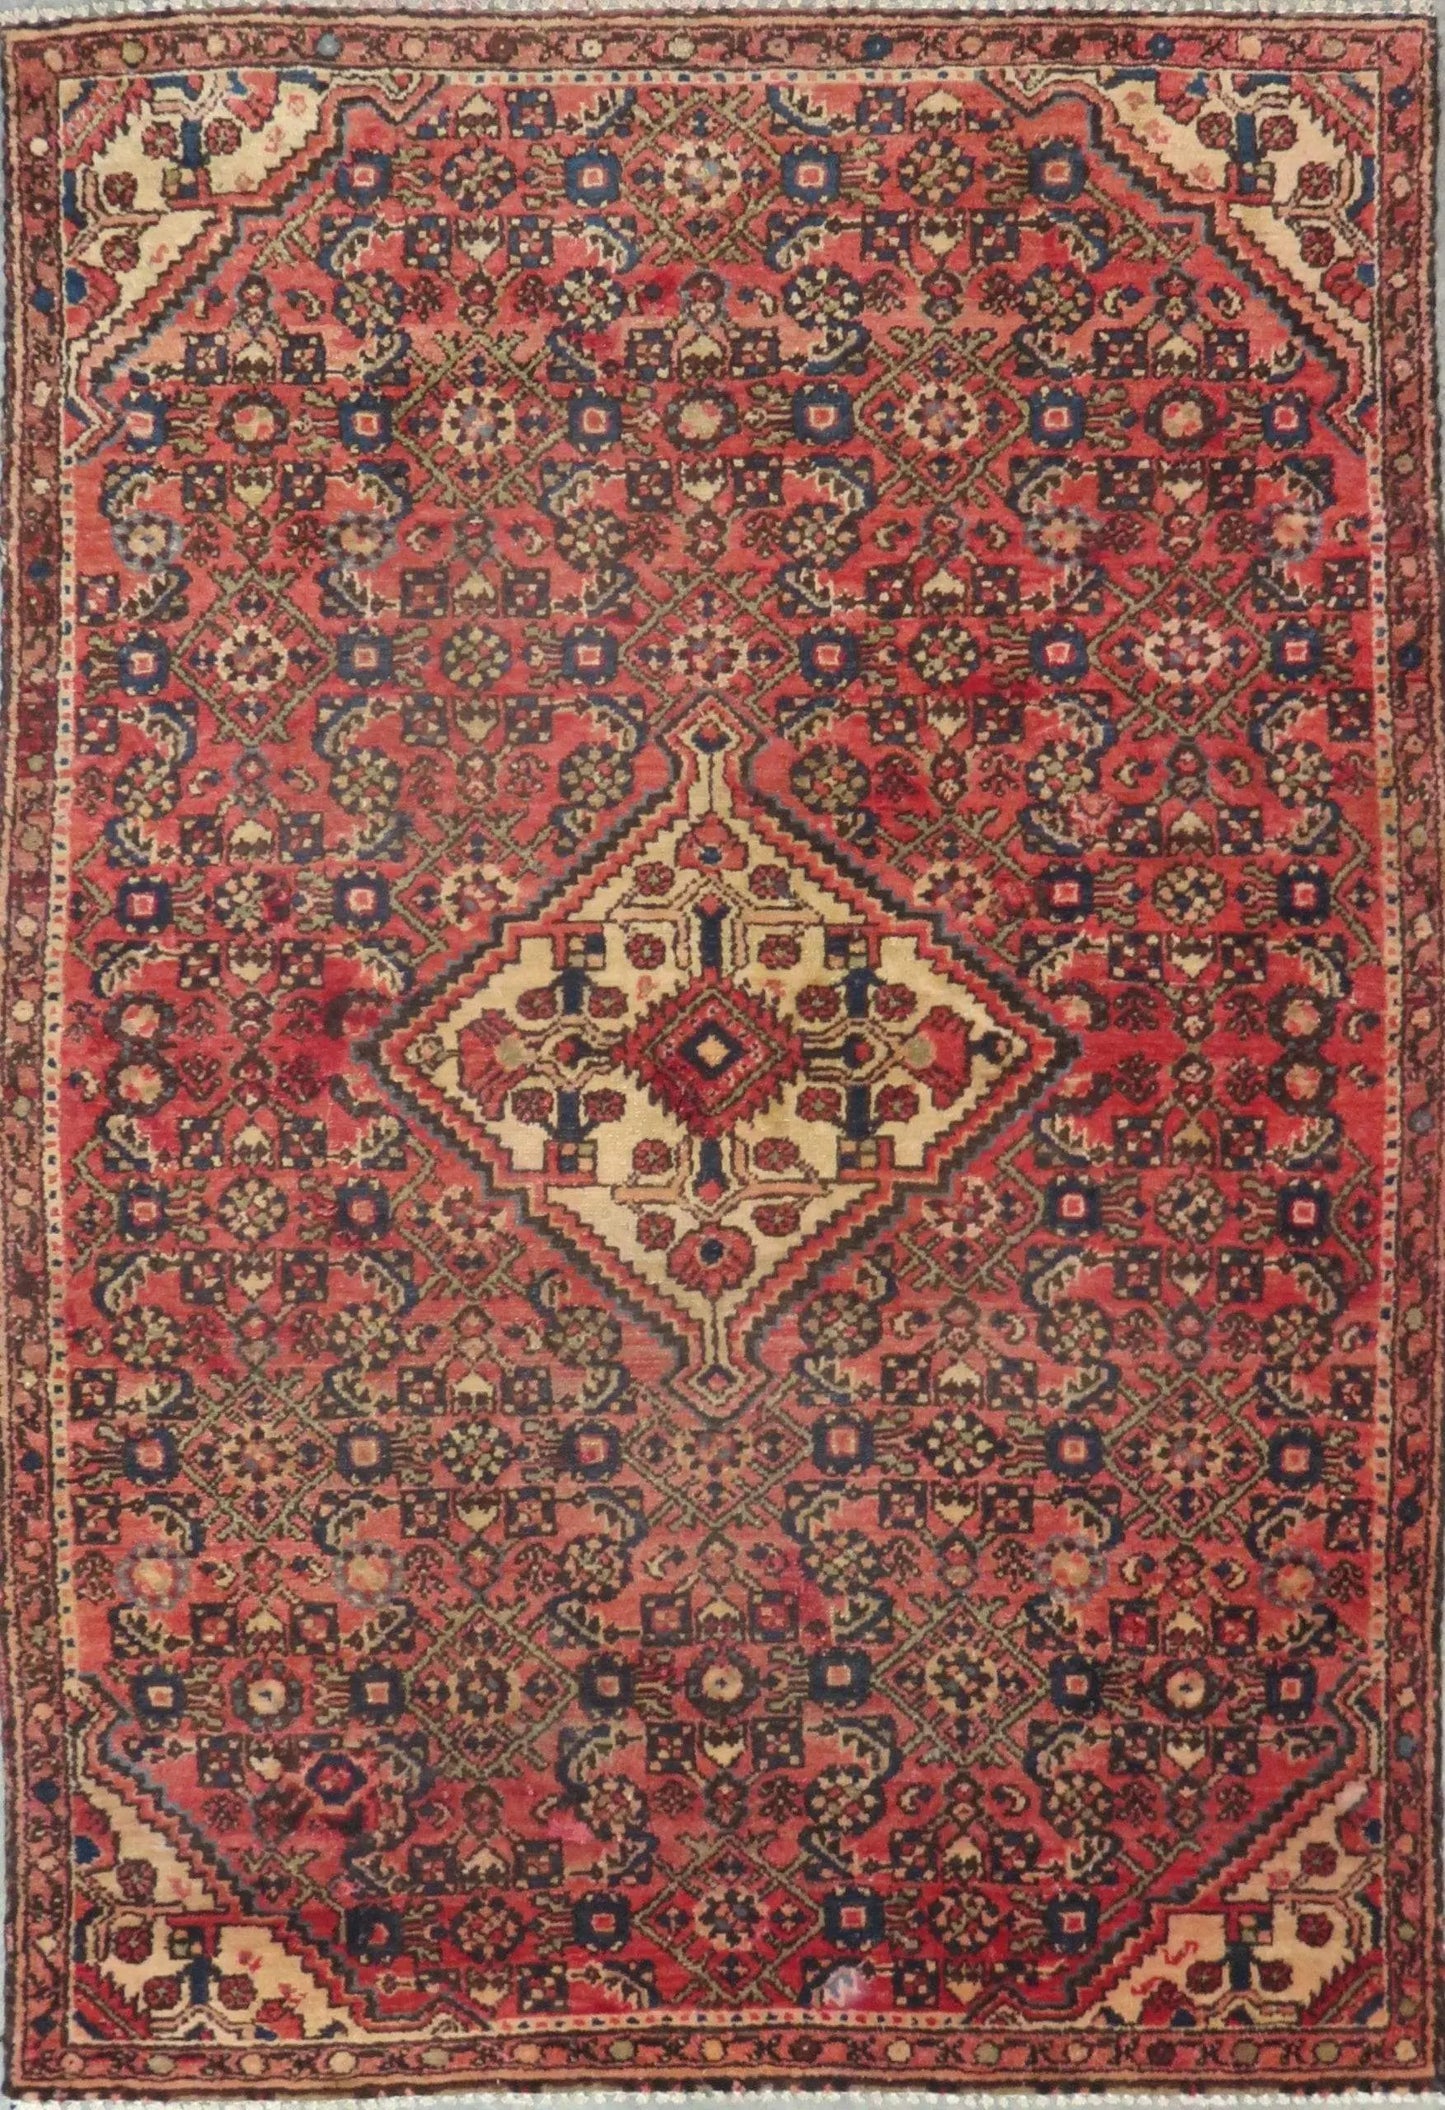 Hand-Knotted Vintage Rug 5'5" x 3'9"